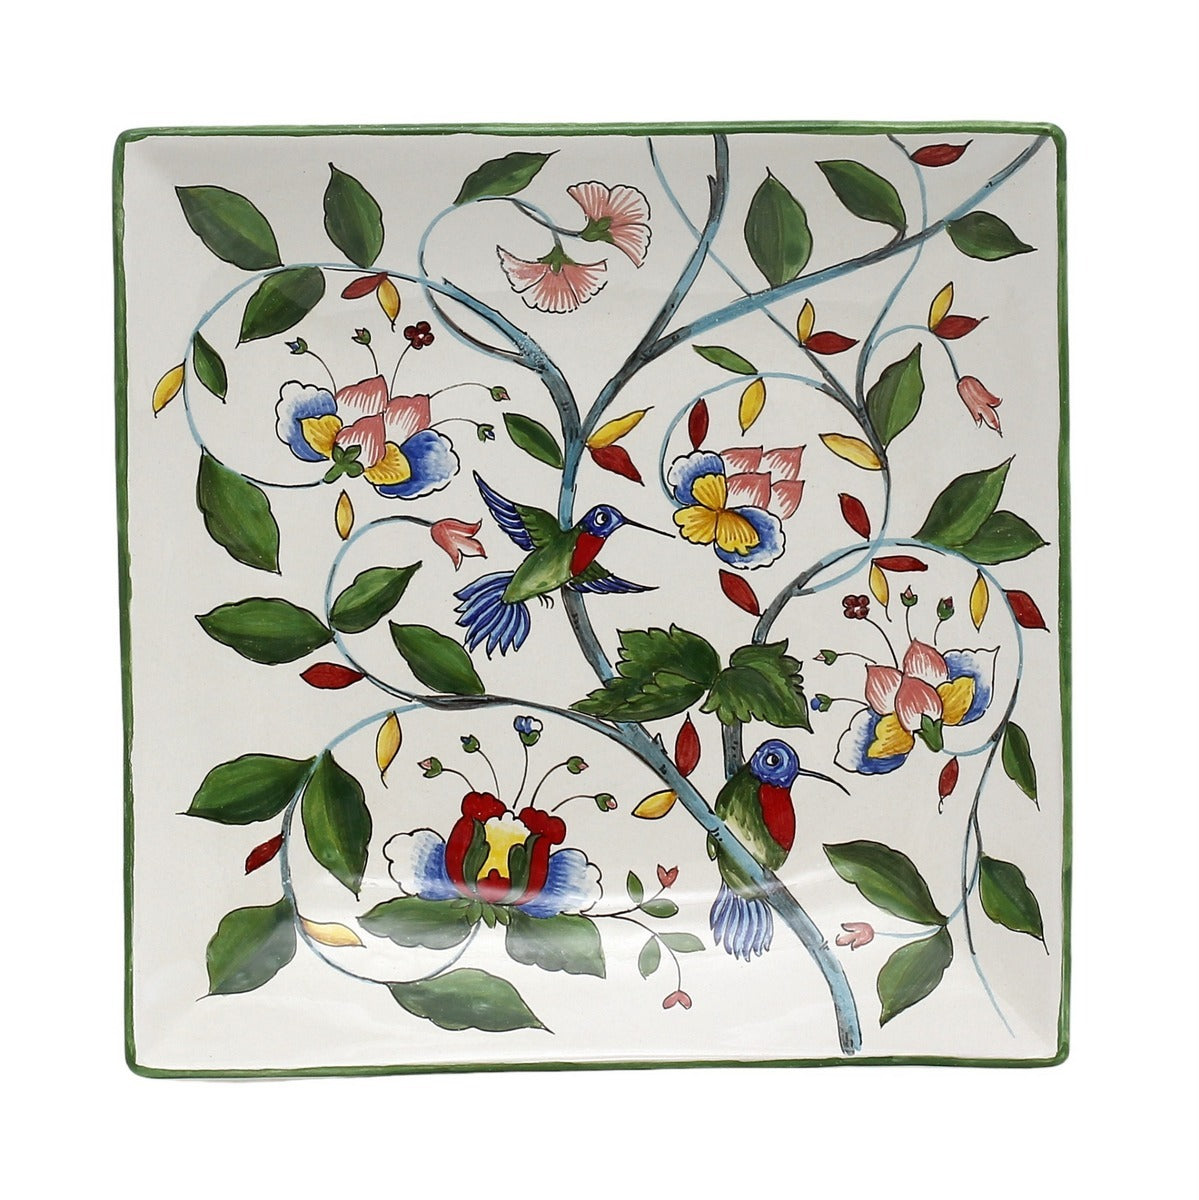 DERUTA FLORIANA: Square Bowl/Tray hand painted decorated in a floral design with hummingbird.